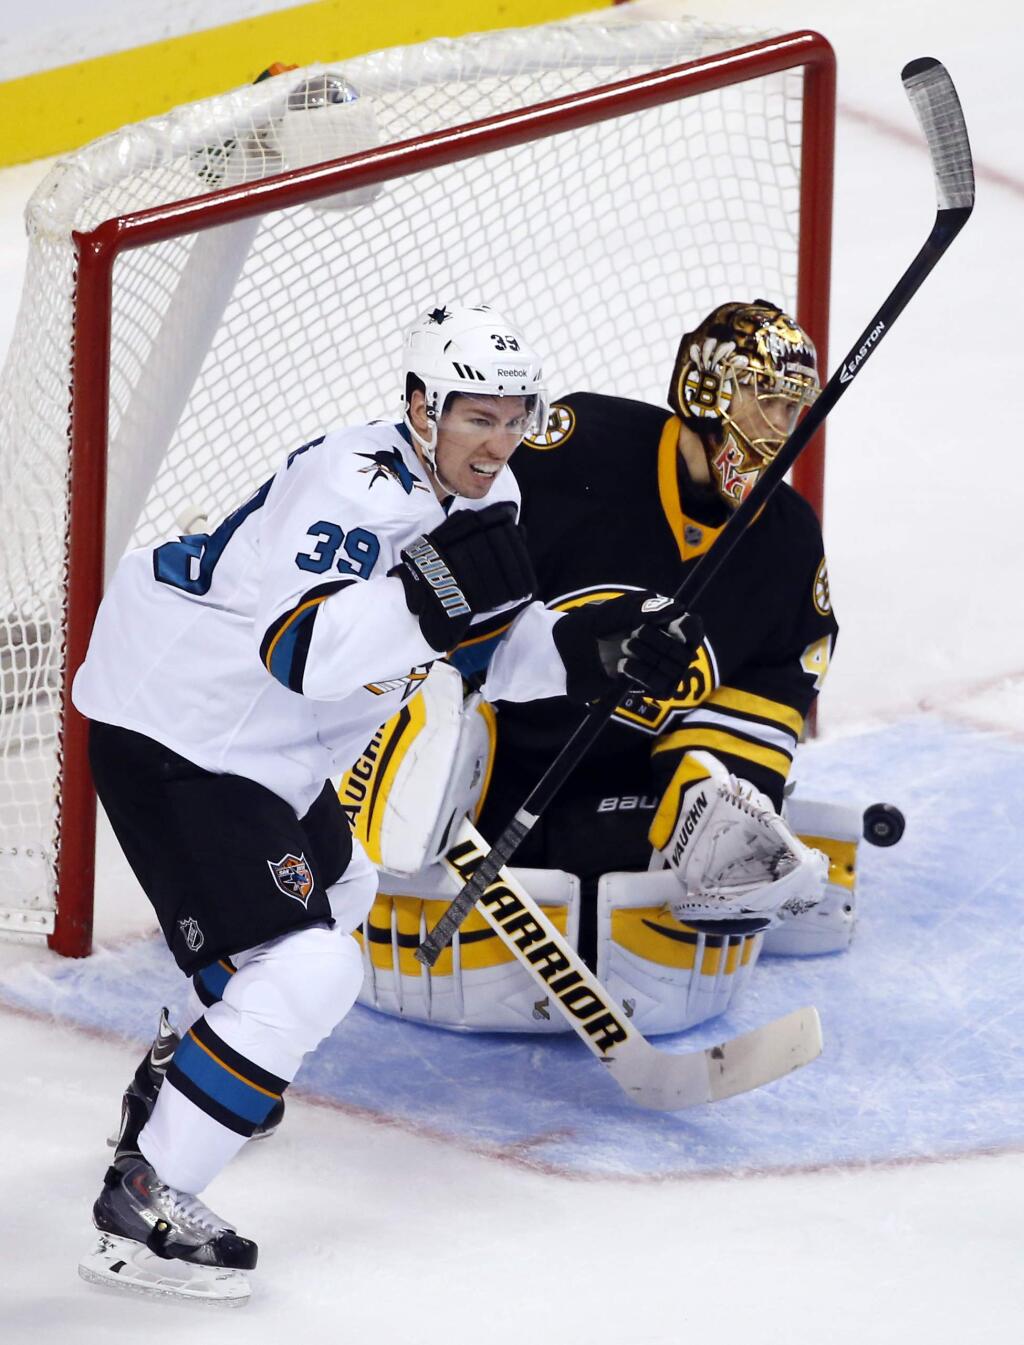 San Jose Sharks center Logan Couture (39) reacts after scoring against Boston Bruins goalie Tuukka Rask during the first period of an NHL hockey game in Boston, Tuesday, Oct. 21, 2014. (AP Photo/Elise Amendola)